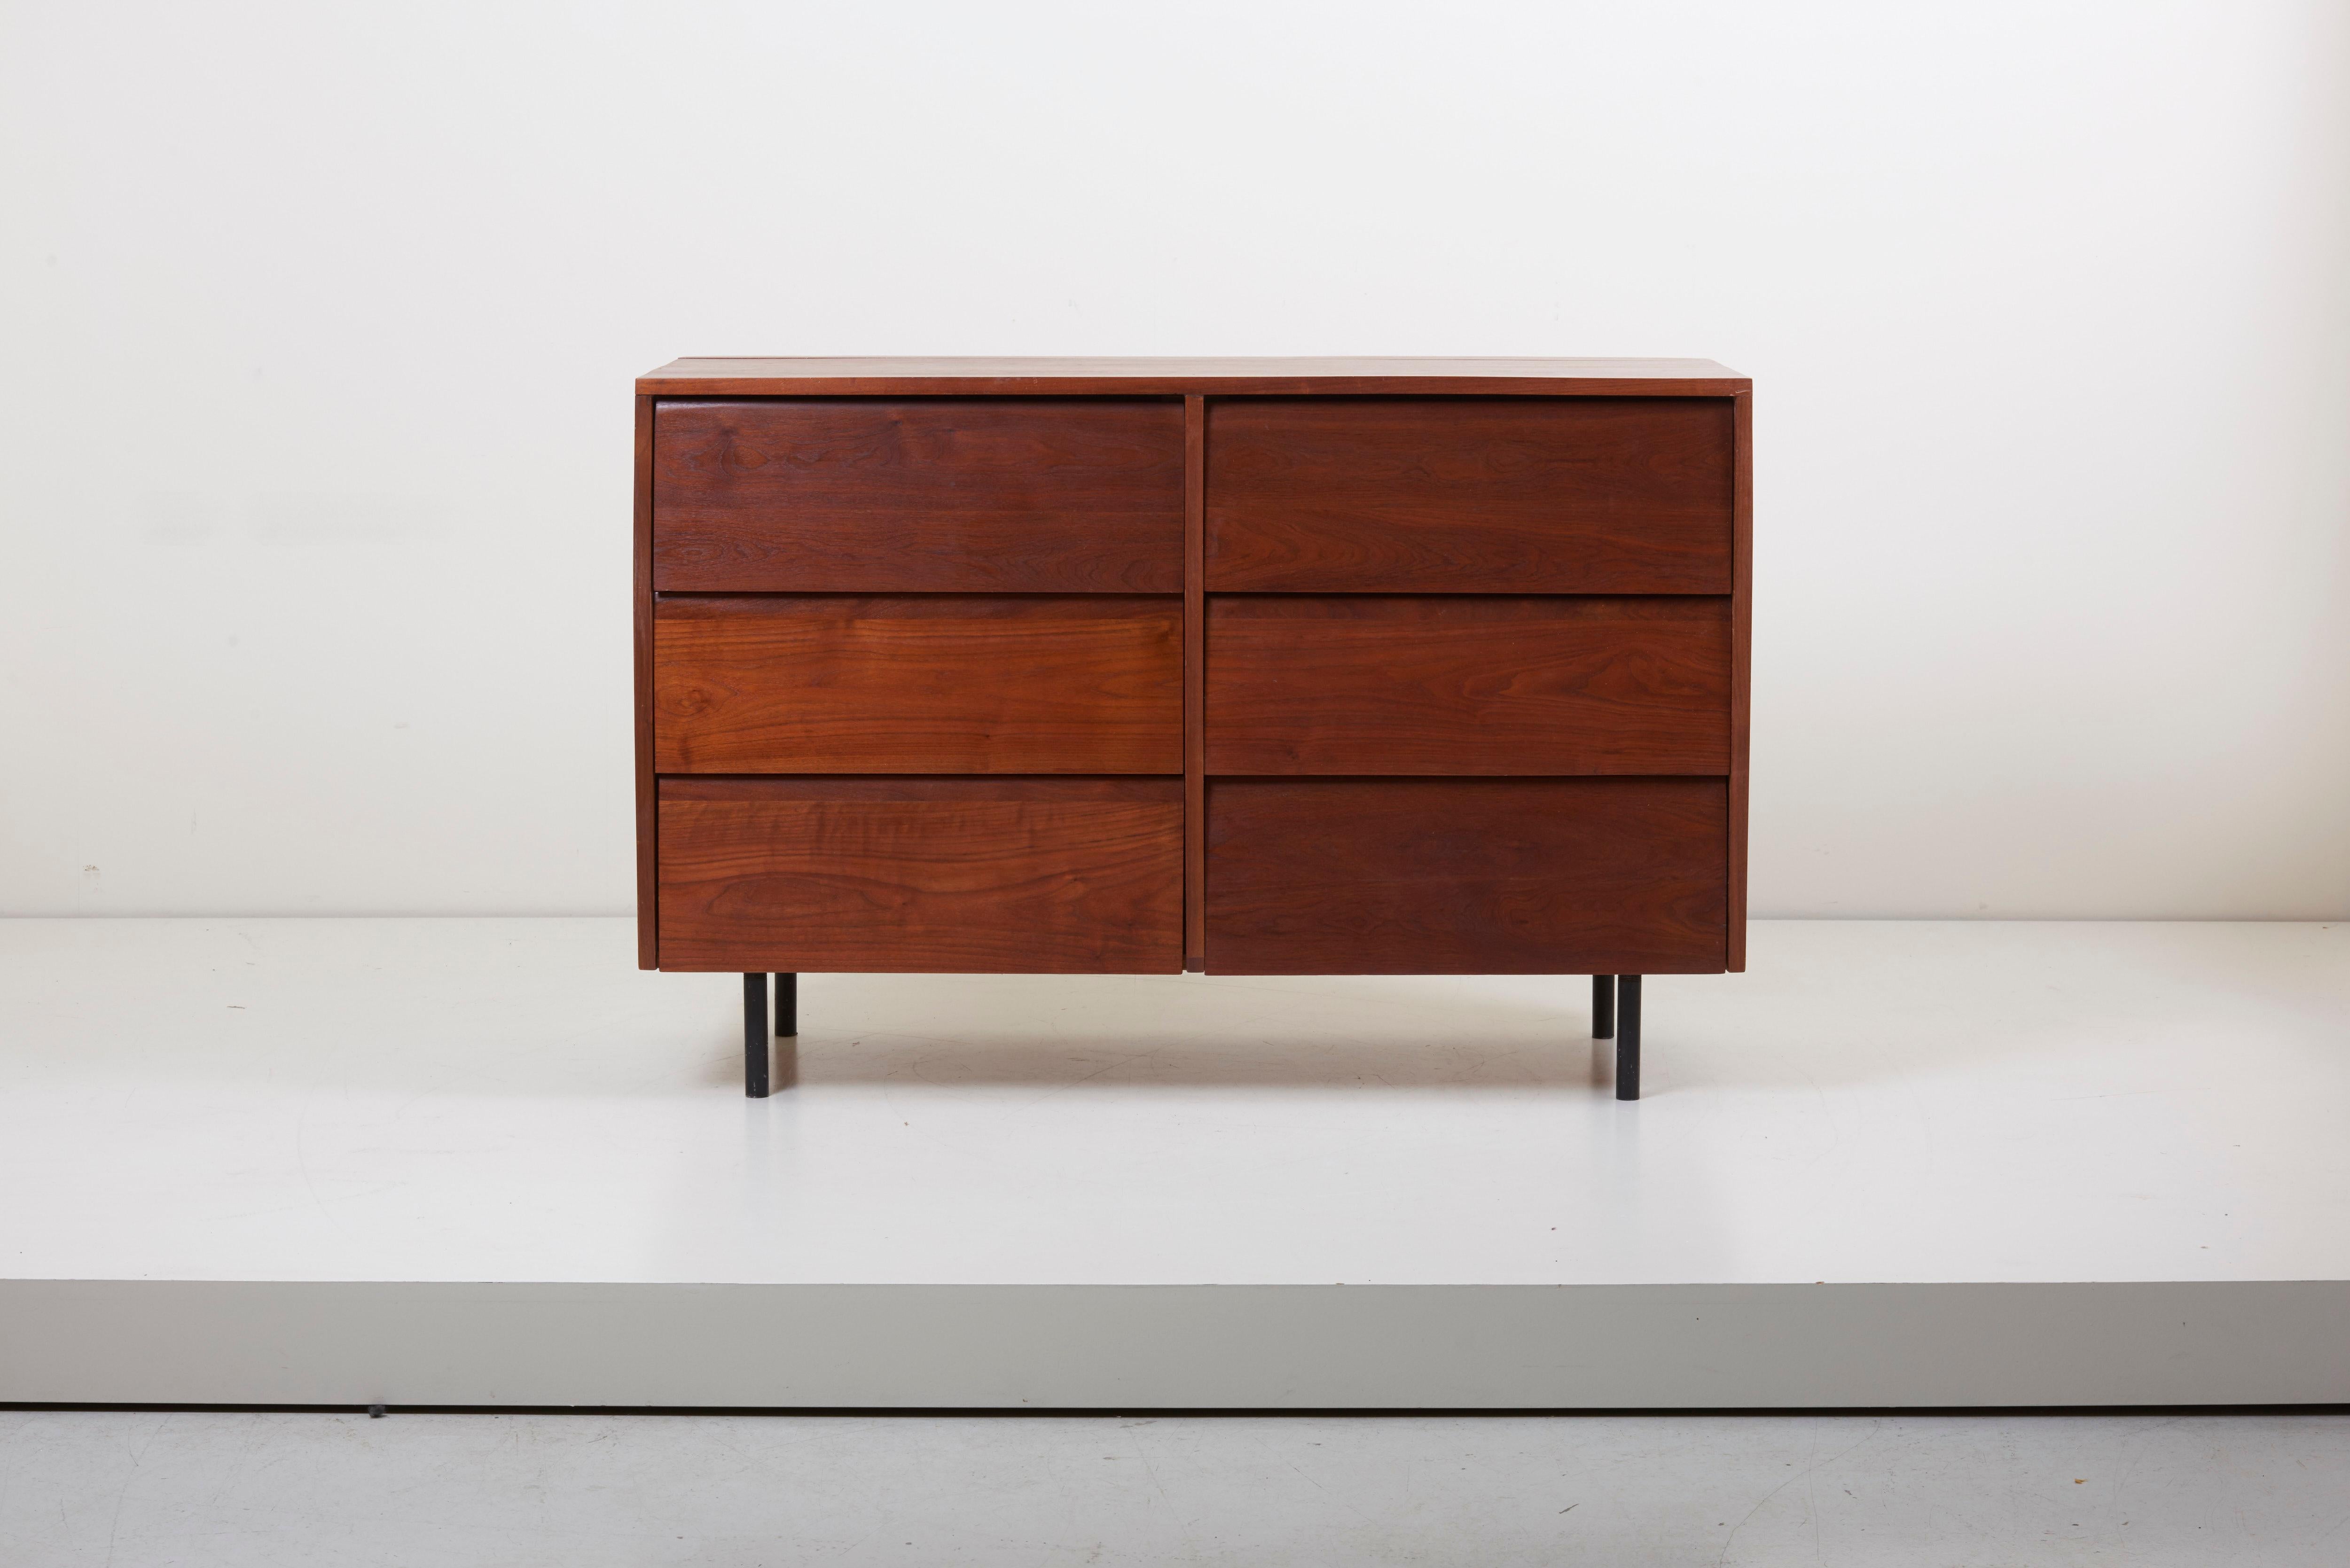 1950s chest of drawers or sideboard by Ben Rouzie, US.